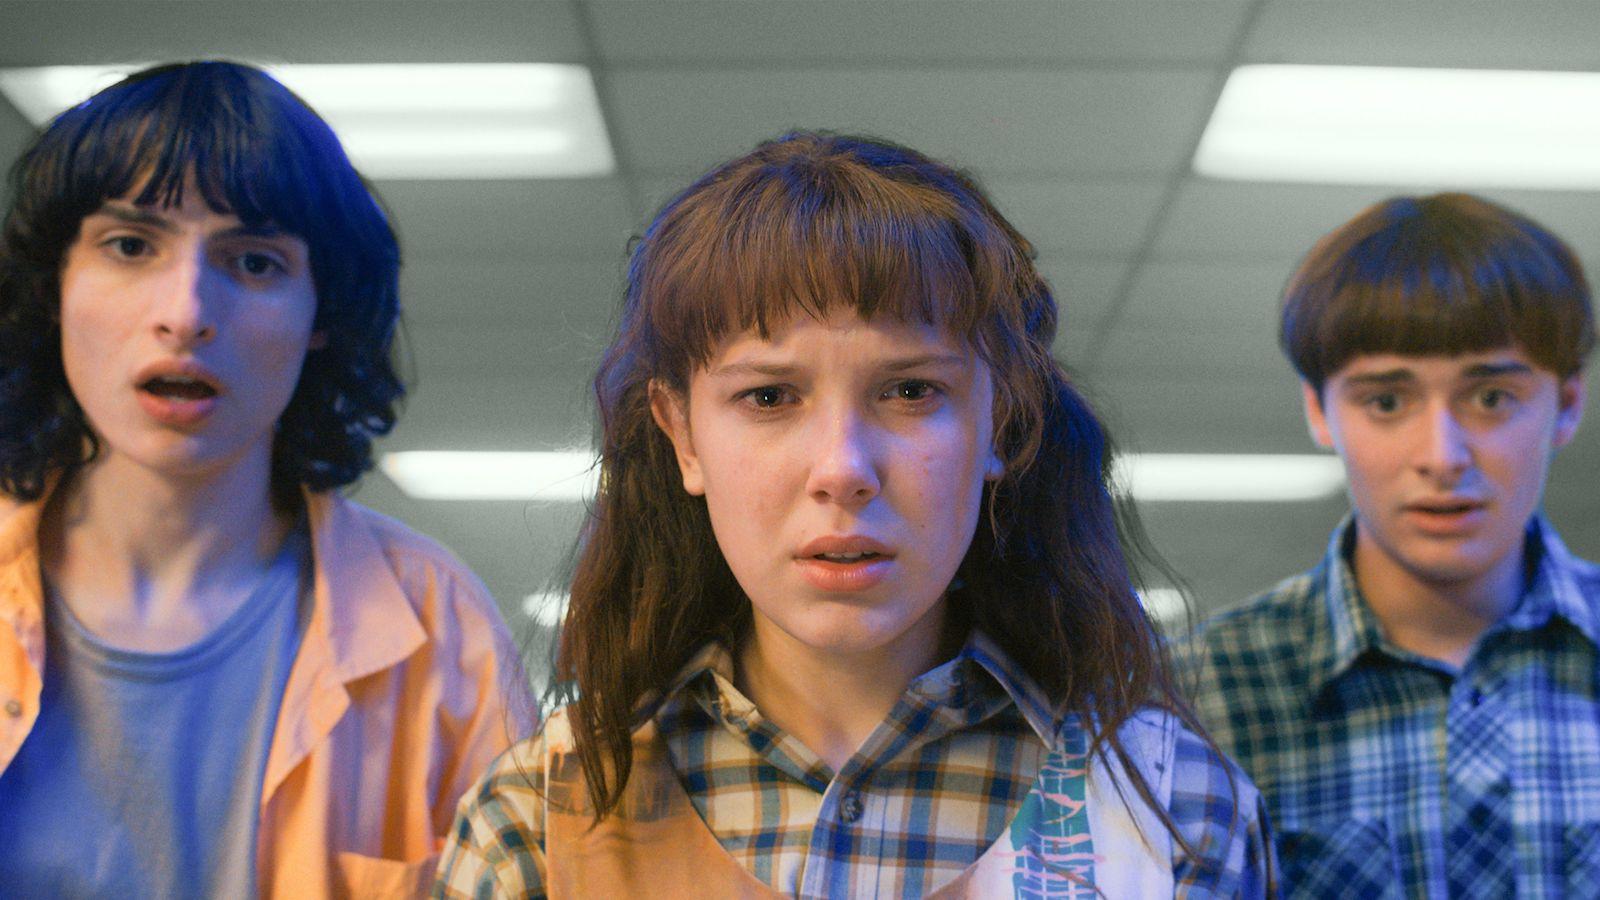 The Stanger Things cast in Season 4